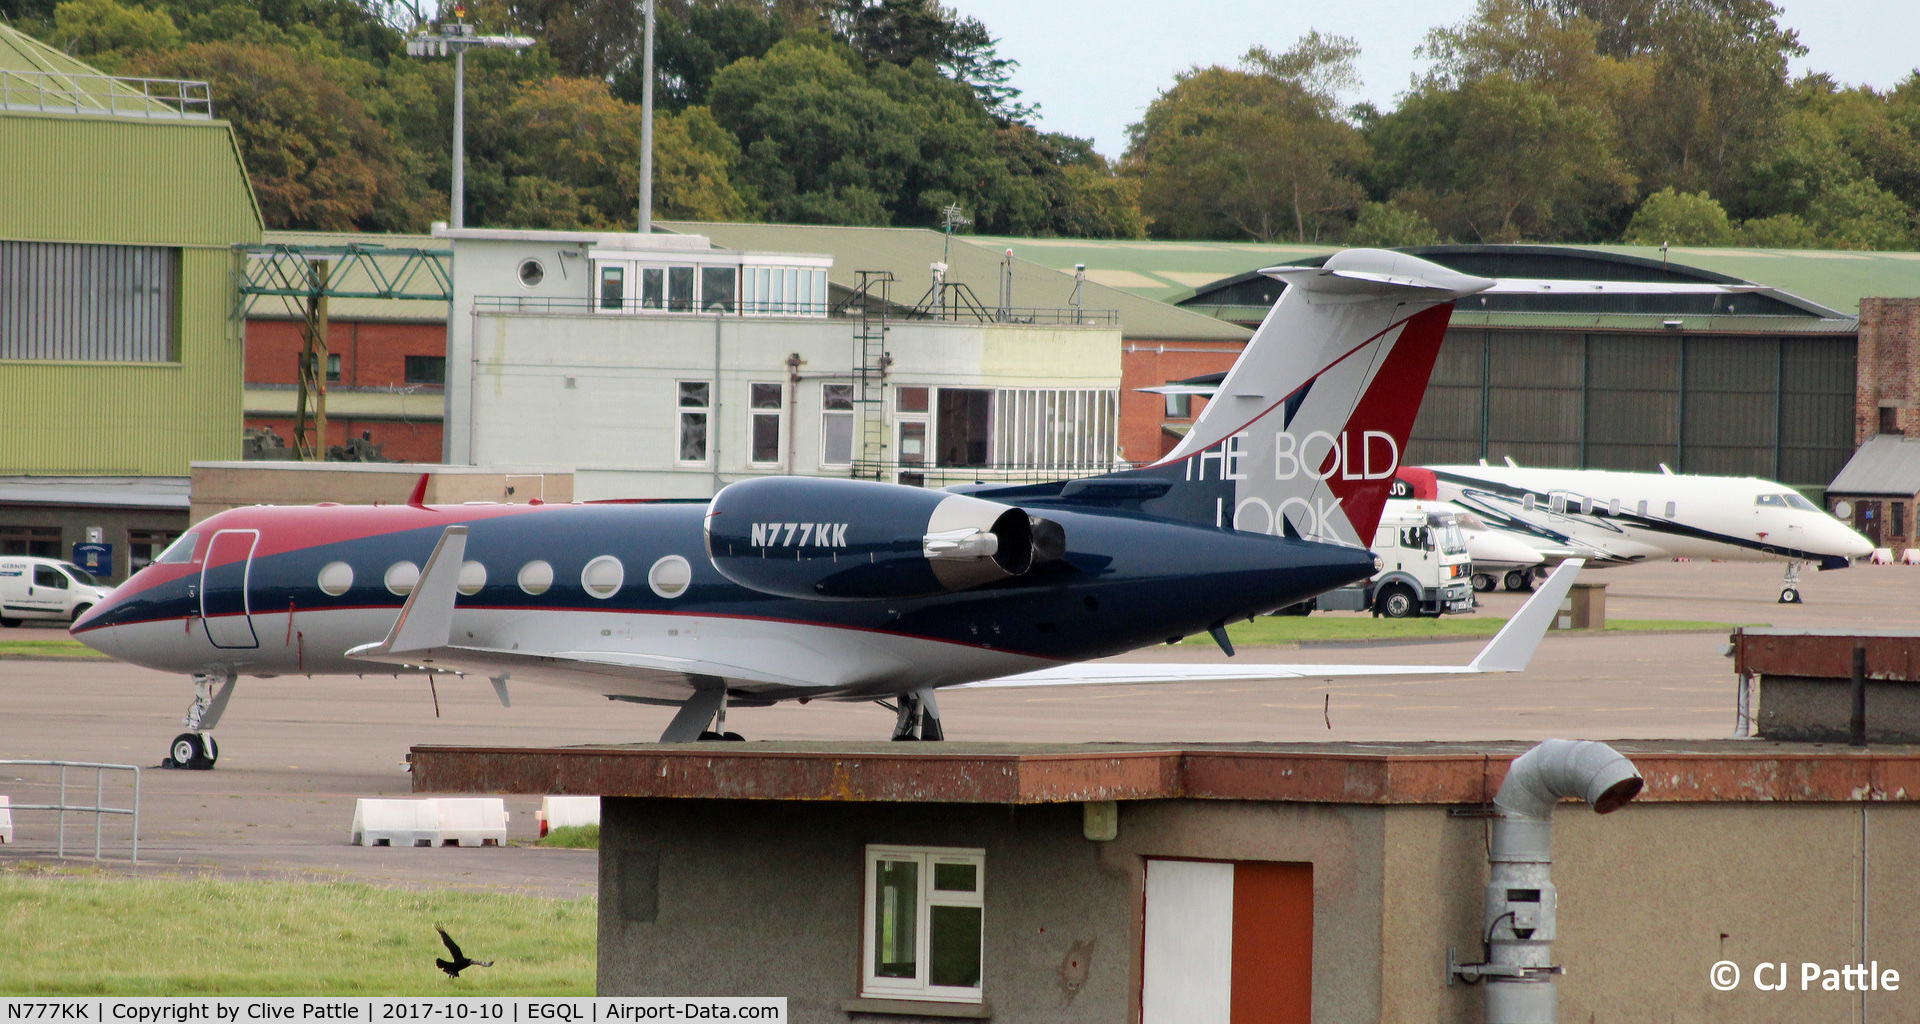 N777KK, 1983 Canadair Challenger 600 (CL-600-1A11) C/N 1082, Pictured on the ramp at the former RAF Leuchars, for the nearby Dunhill Links Golf Championships at St Andrews.